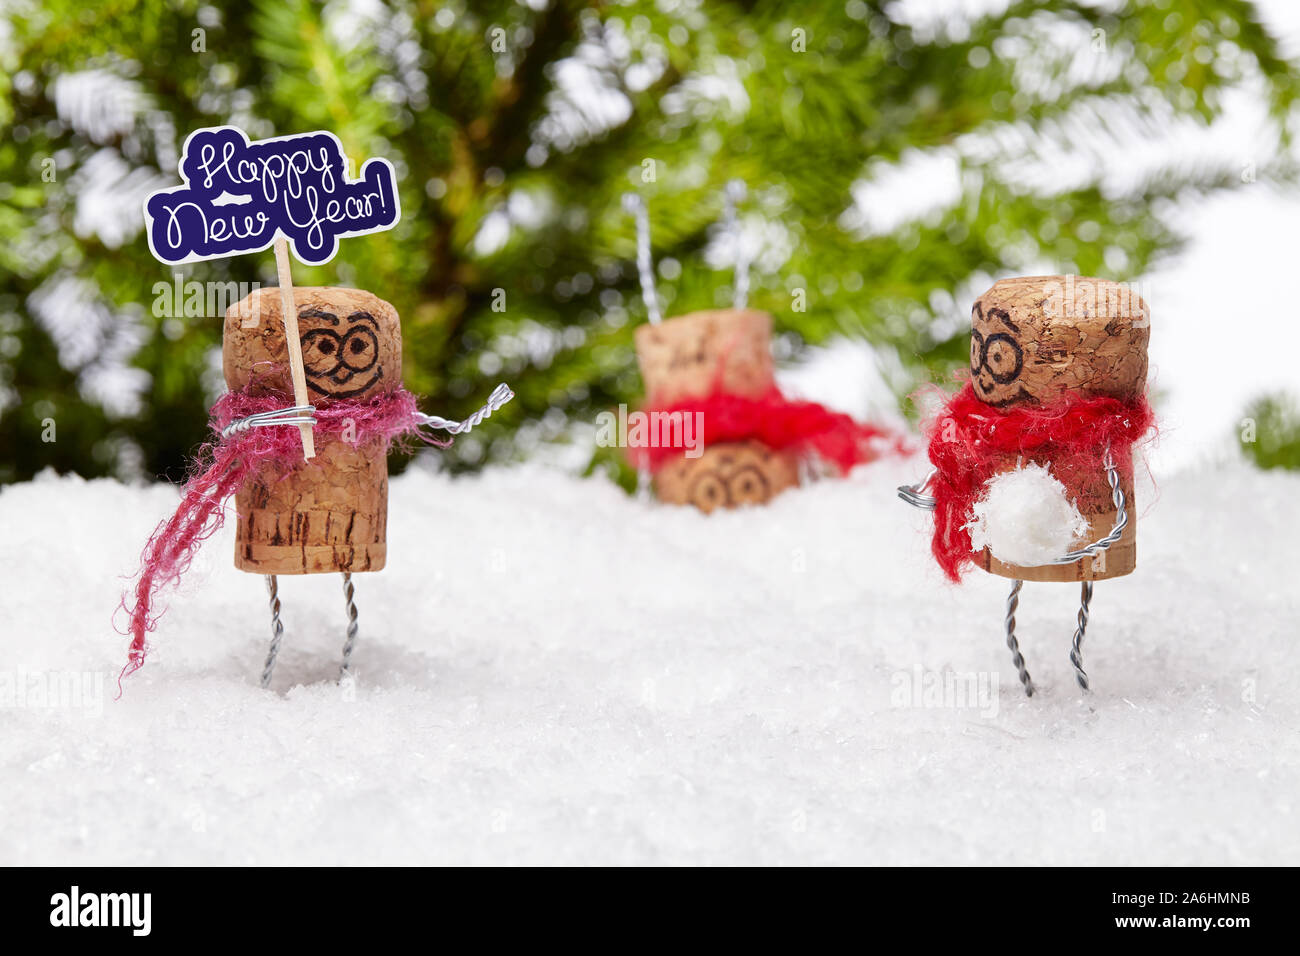 Funny champagne cork man on white snow wishes anybody 'happy new year'. His playful pal wants to play snowball fight, another is standing on the head. Stock Photo